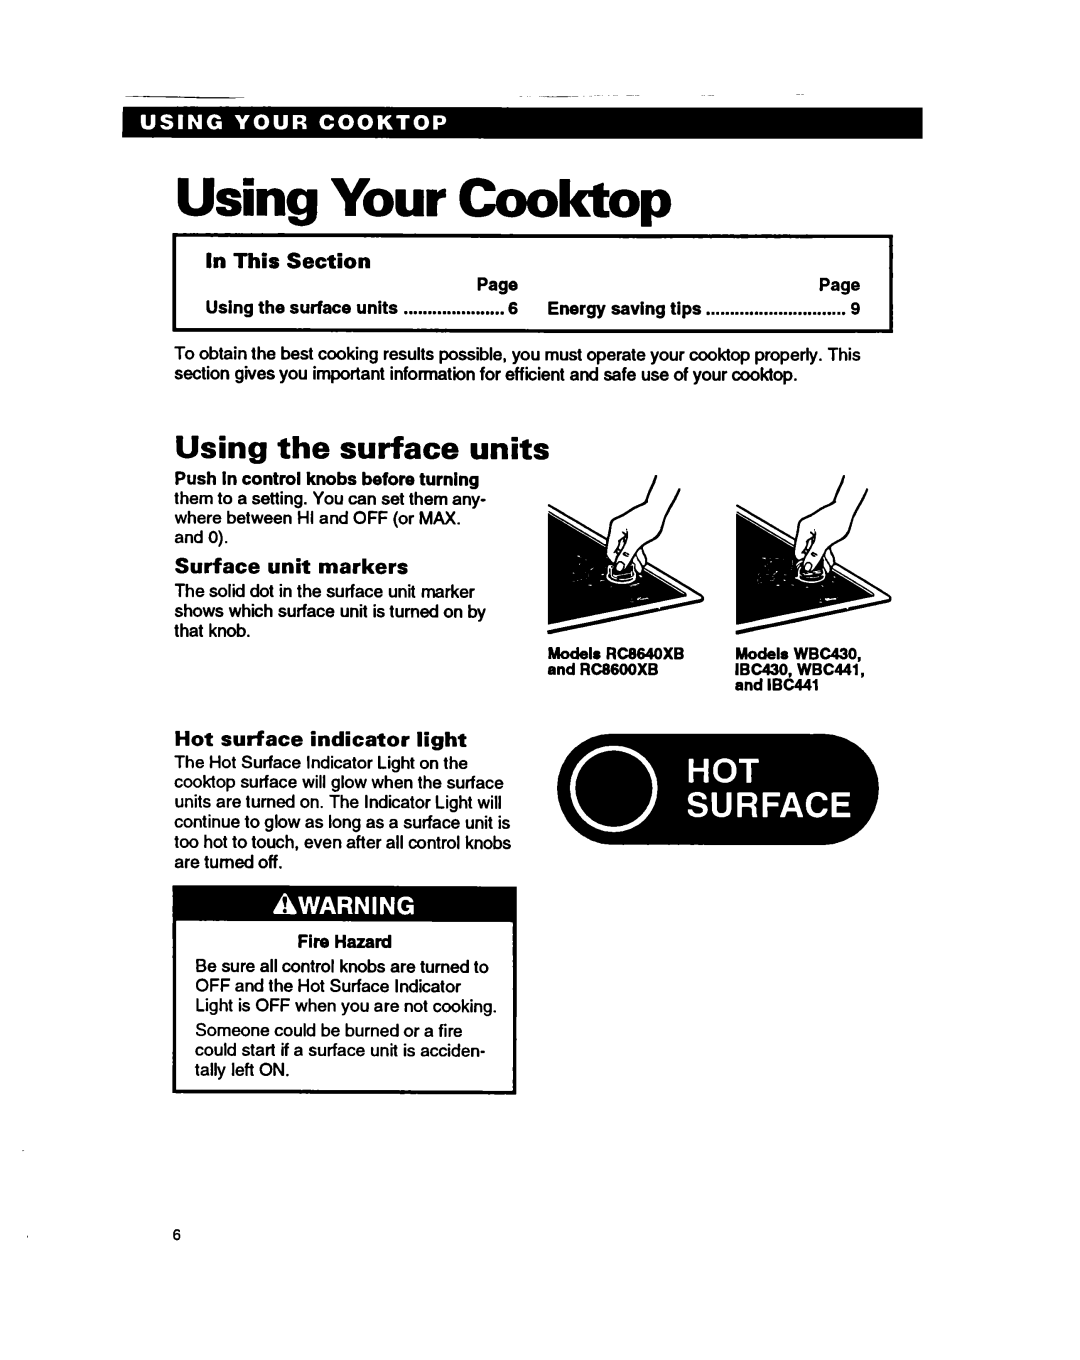 Whirlpool RC864OXB Using Your Cooktop, Using the surface units, Push In control knobs before turning, Fire Hazard 